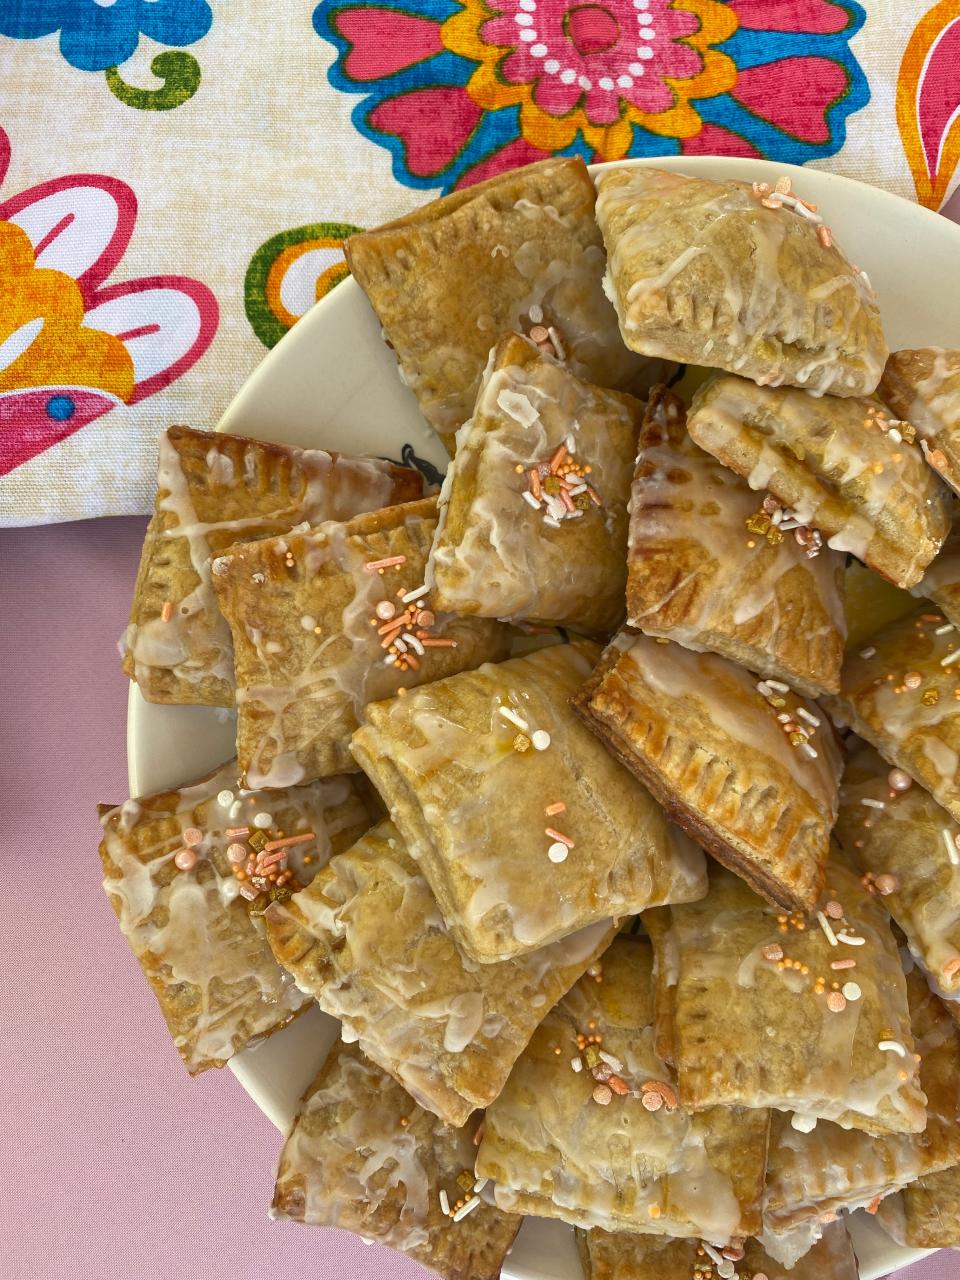 The bakery will feature fresh made sourdough bread, homemade pies and cakes as well as seasonal pastries like cookies, danishes and these peaches and cream pop-tarts.